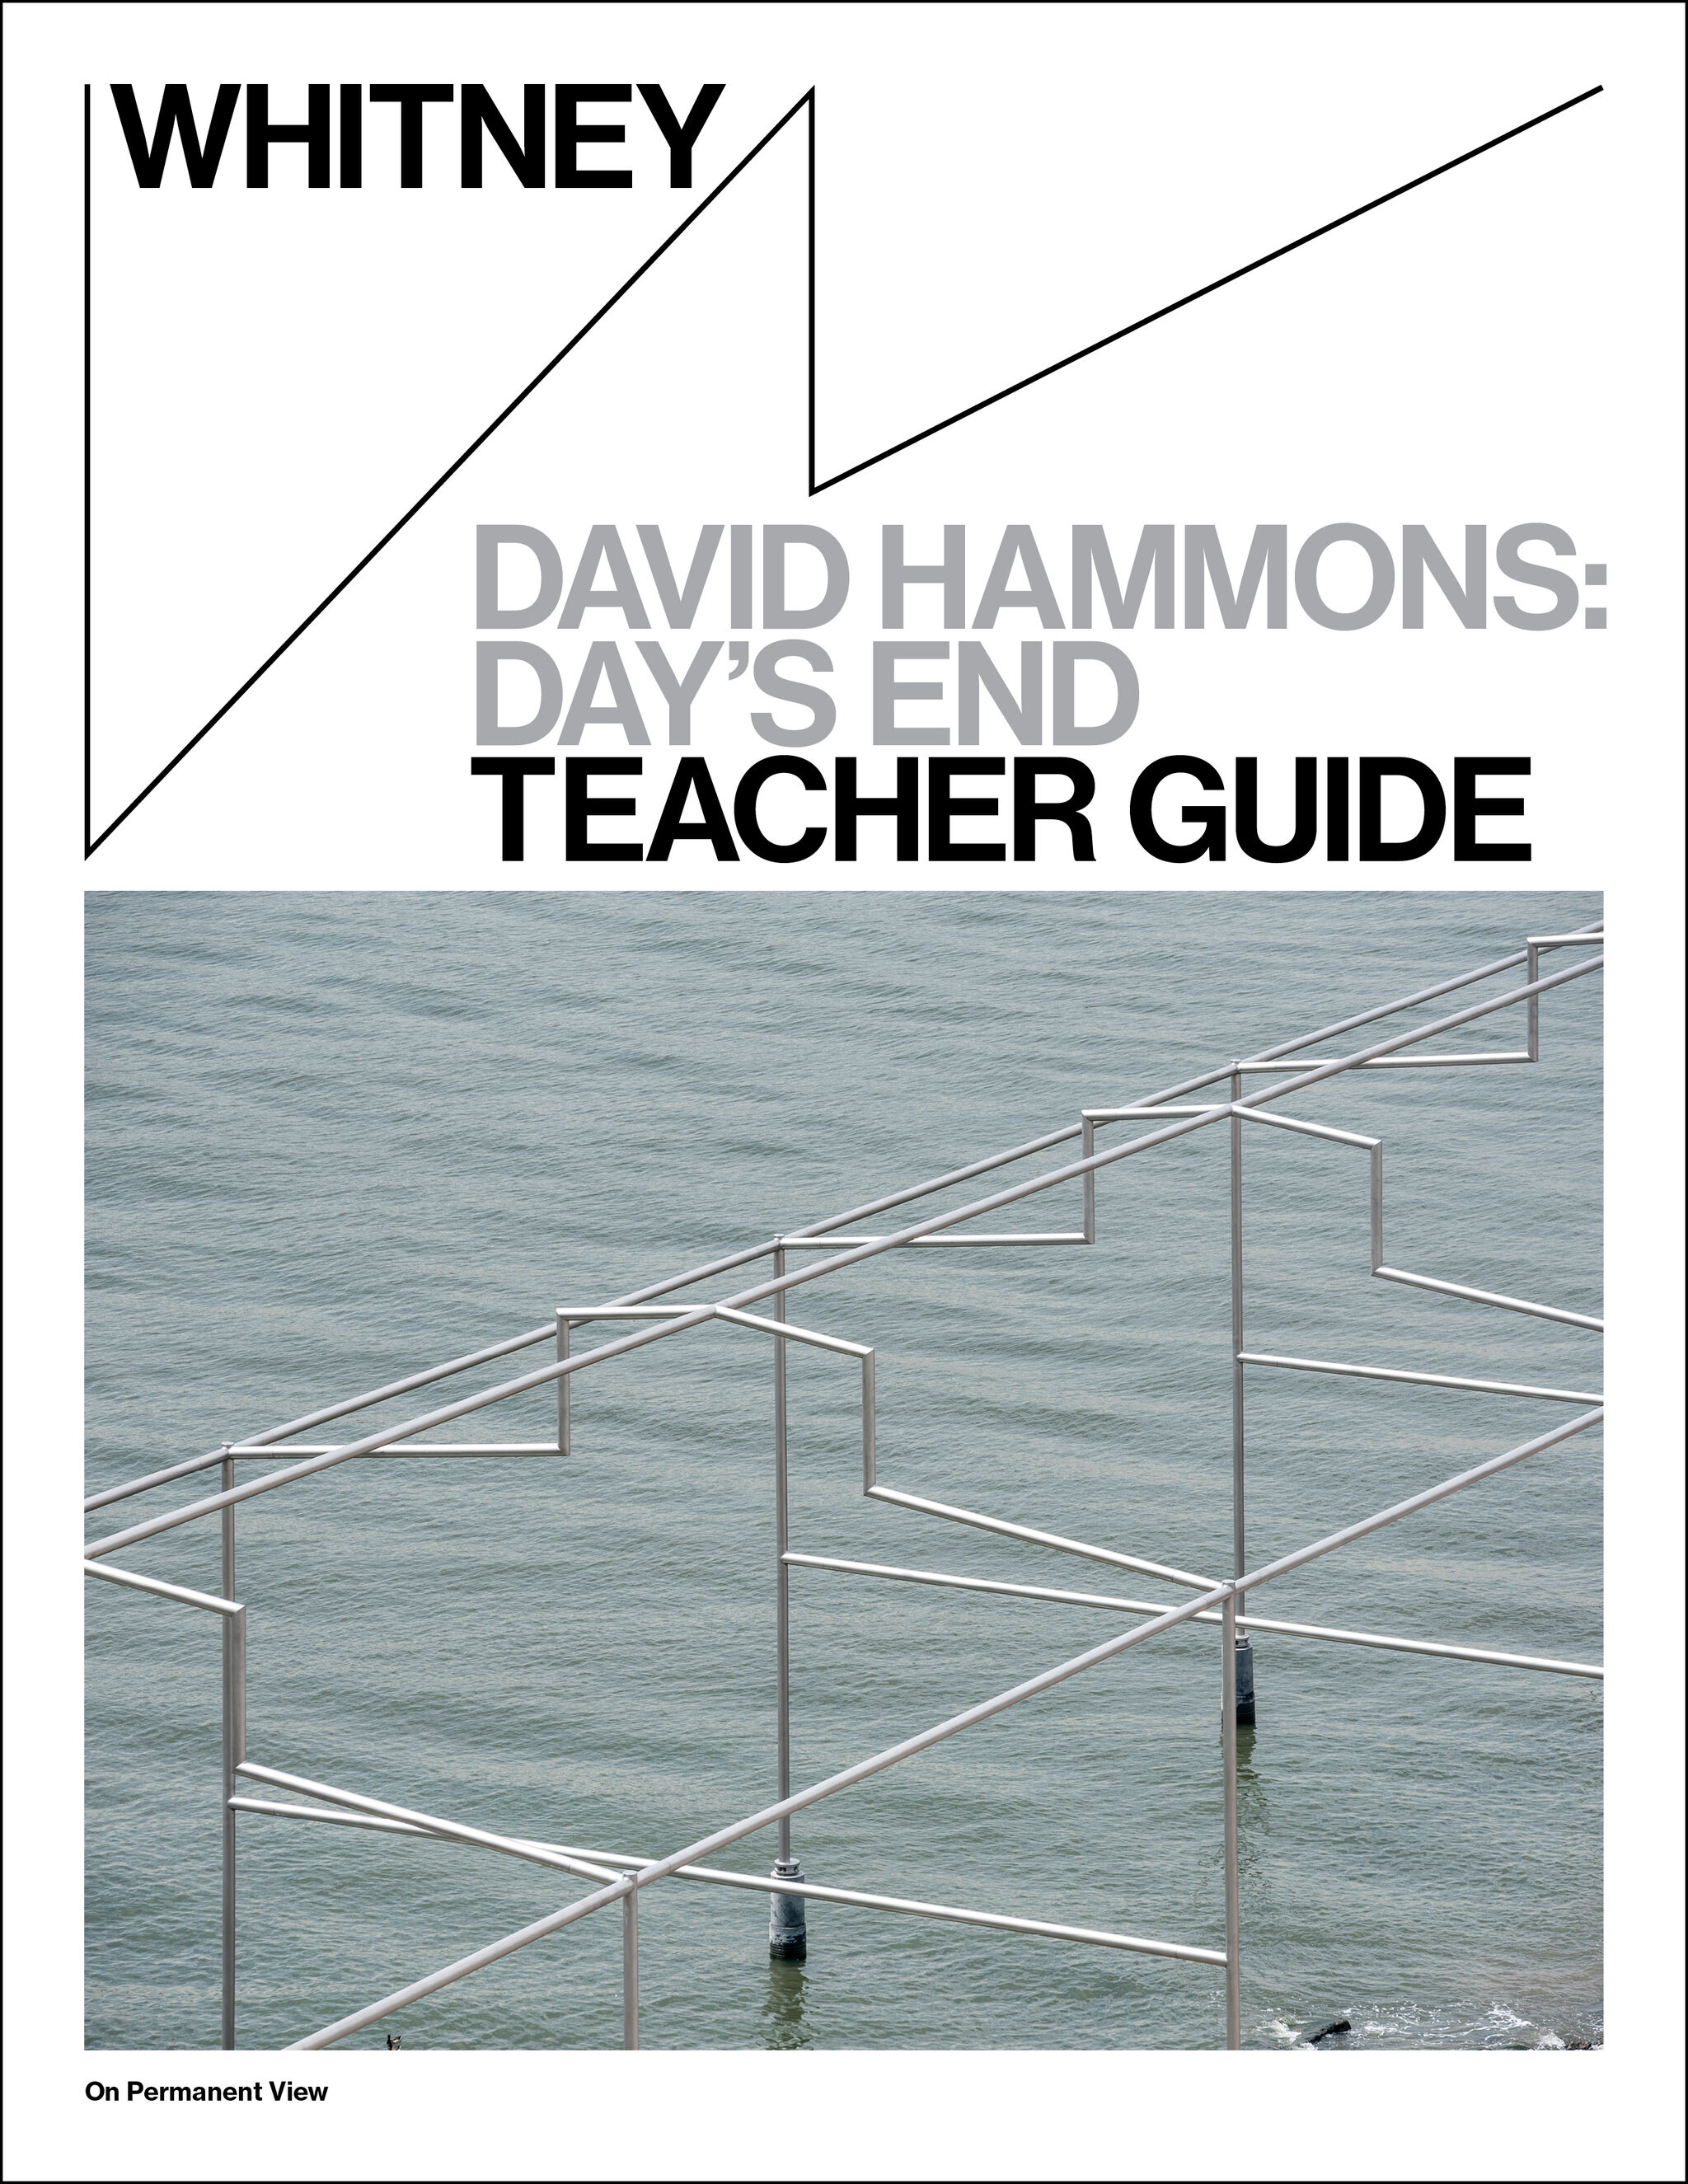 Cover image of Teacher Guide for David Hammons: Day's End, with image of Day's End sculpture against rippling water.